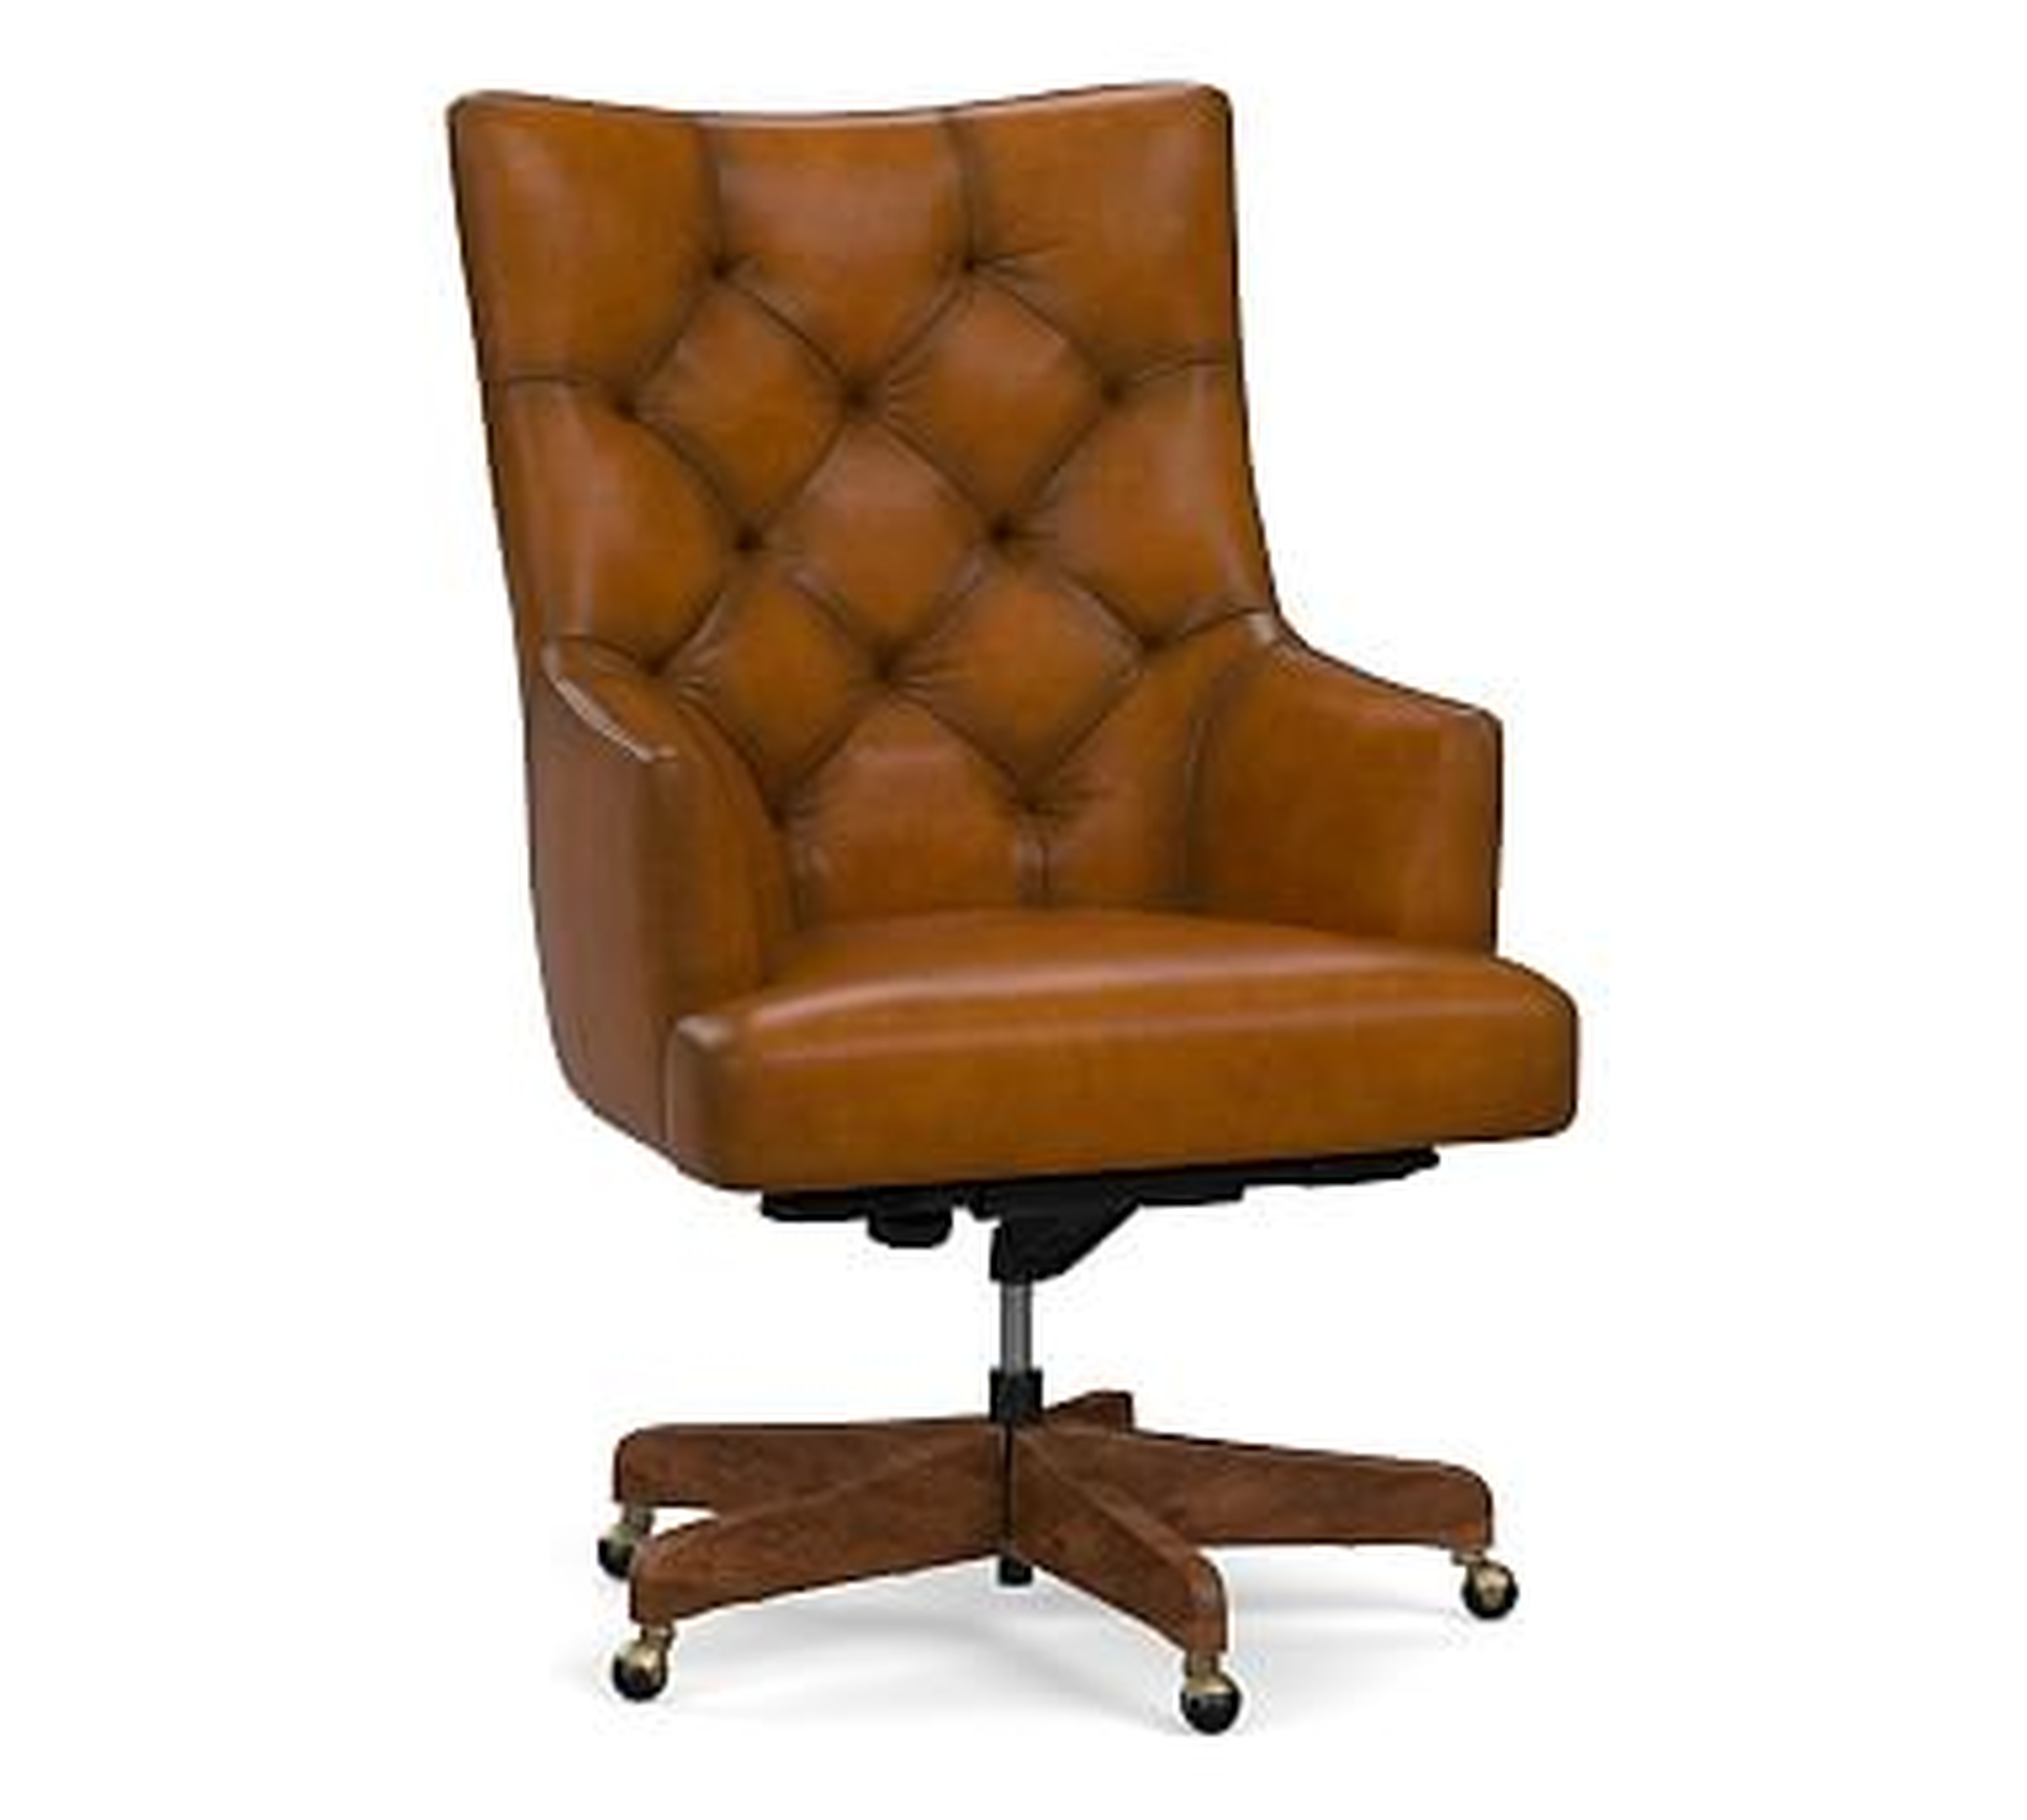 Radcliffe Tufted Leather Swivel Desk Chair, Rustic Brown Base, Burnished Bourbon - Pottery Barn